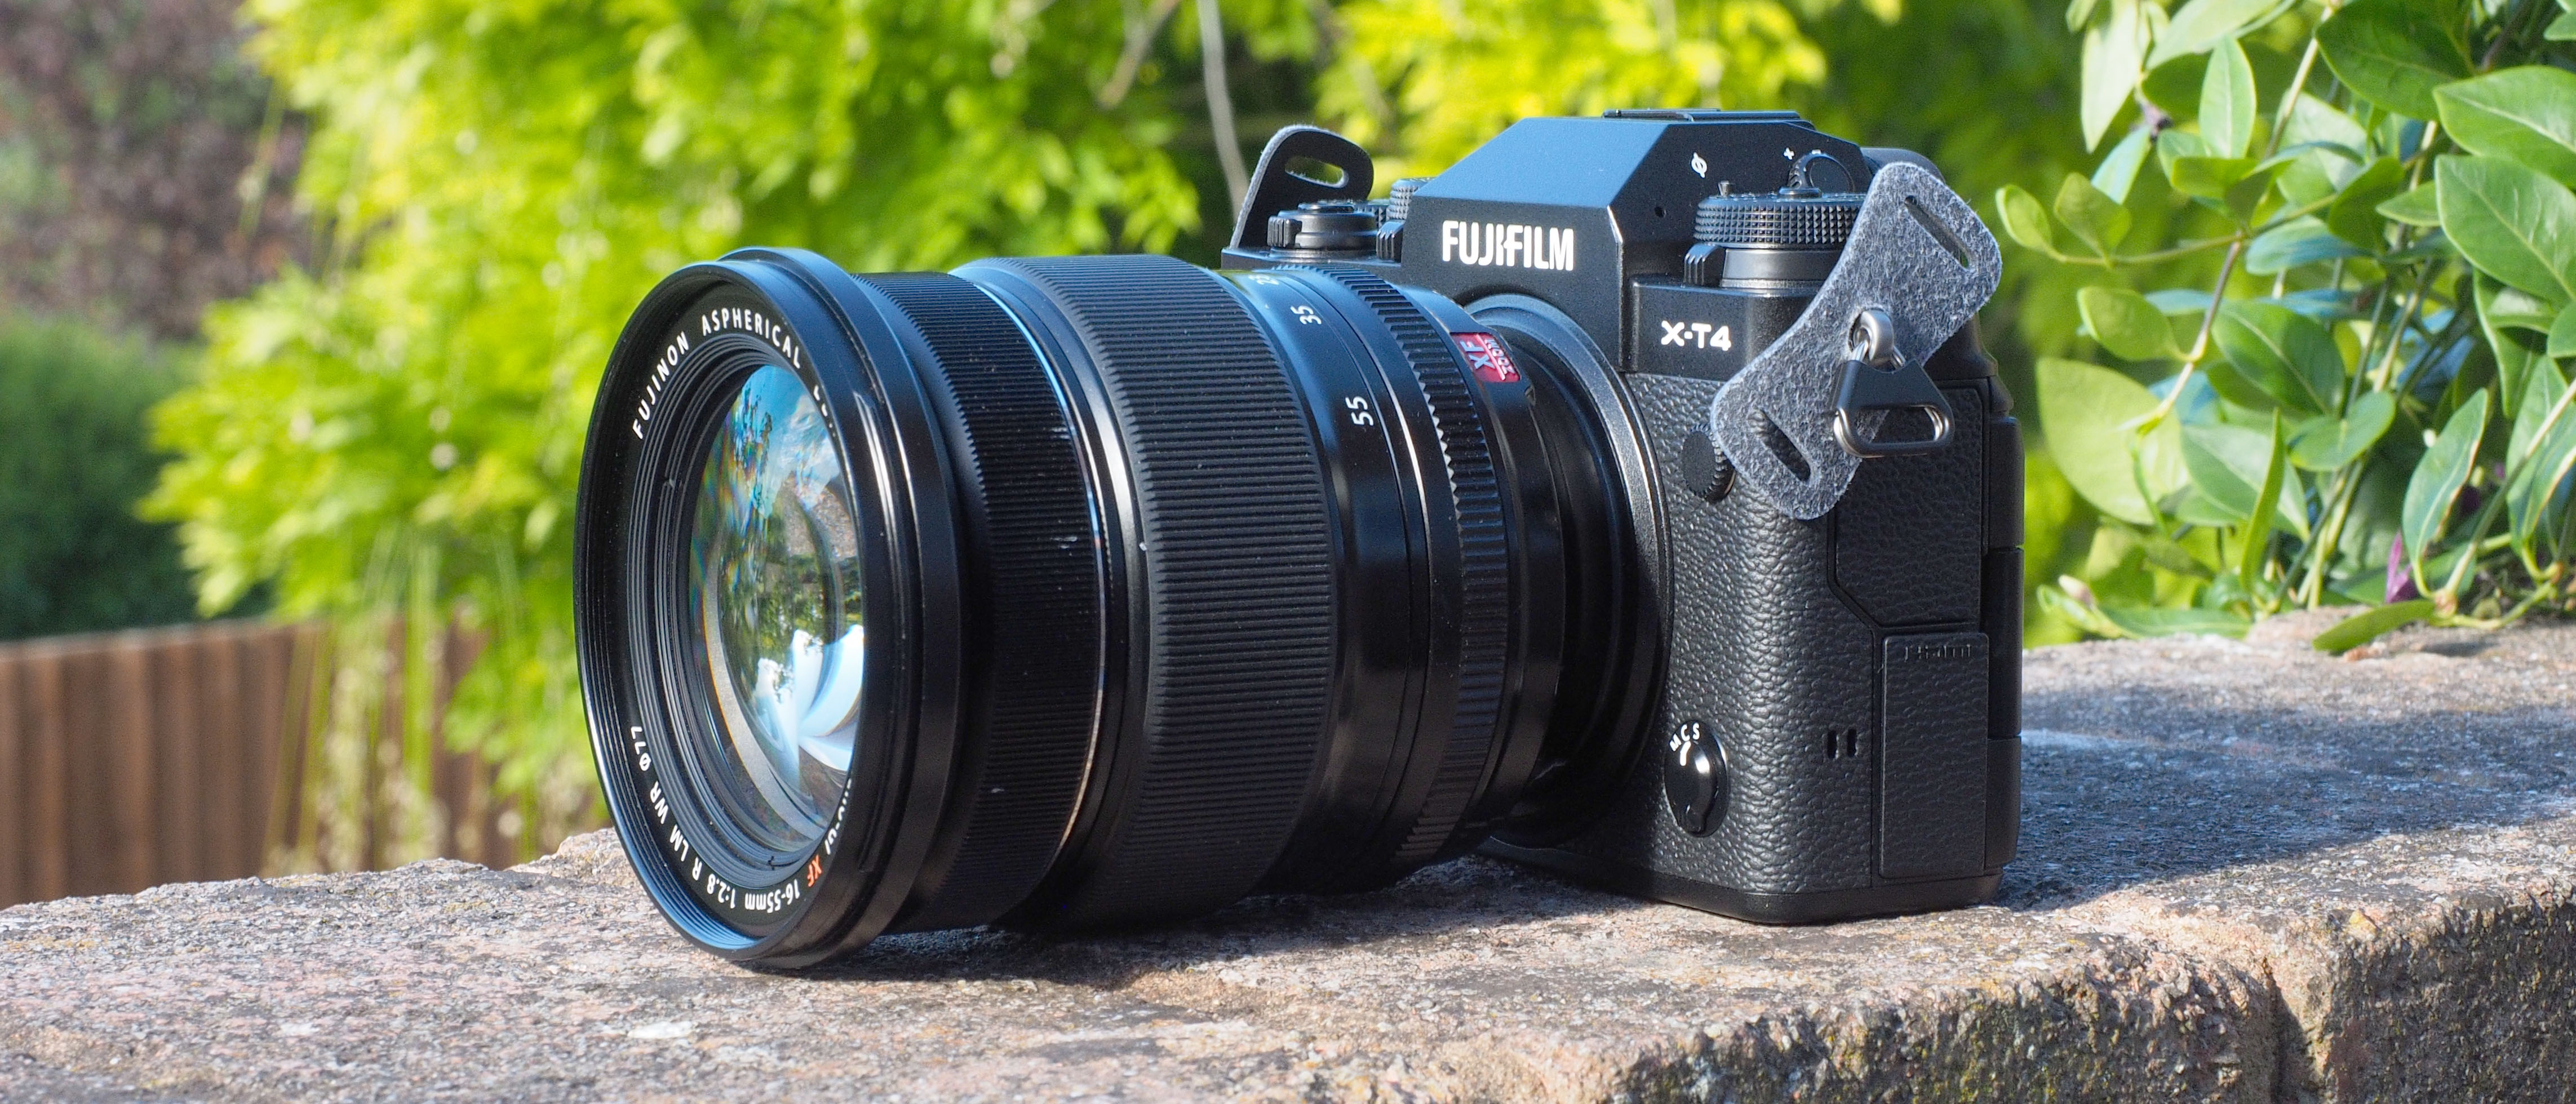 Fujifilm XT4 Review in 2021 - The Cotswold Photographer